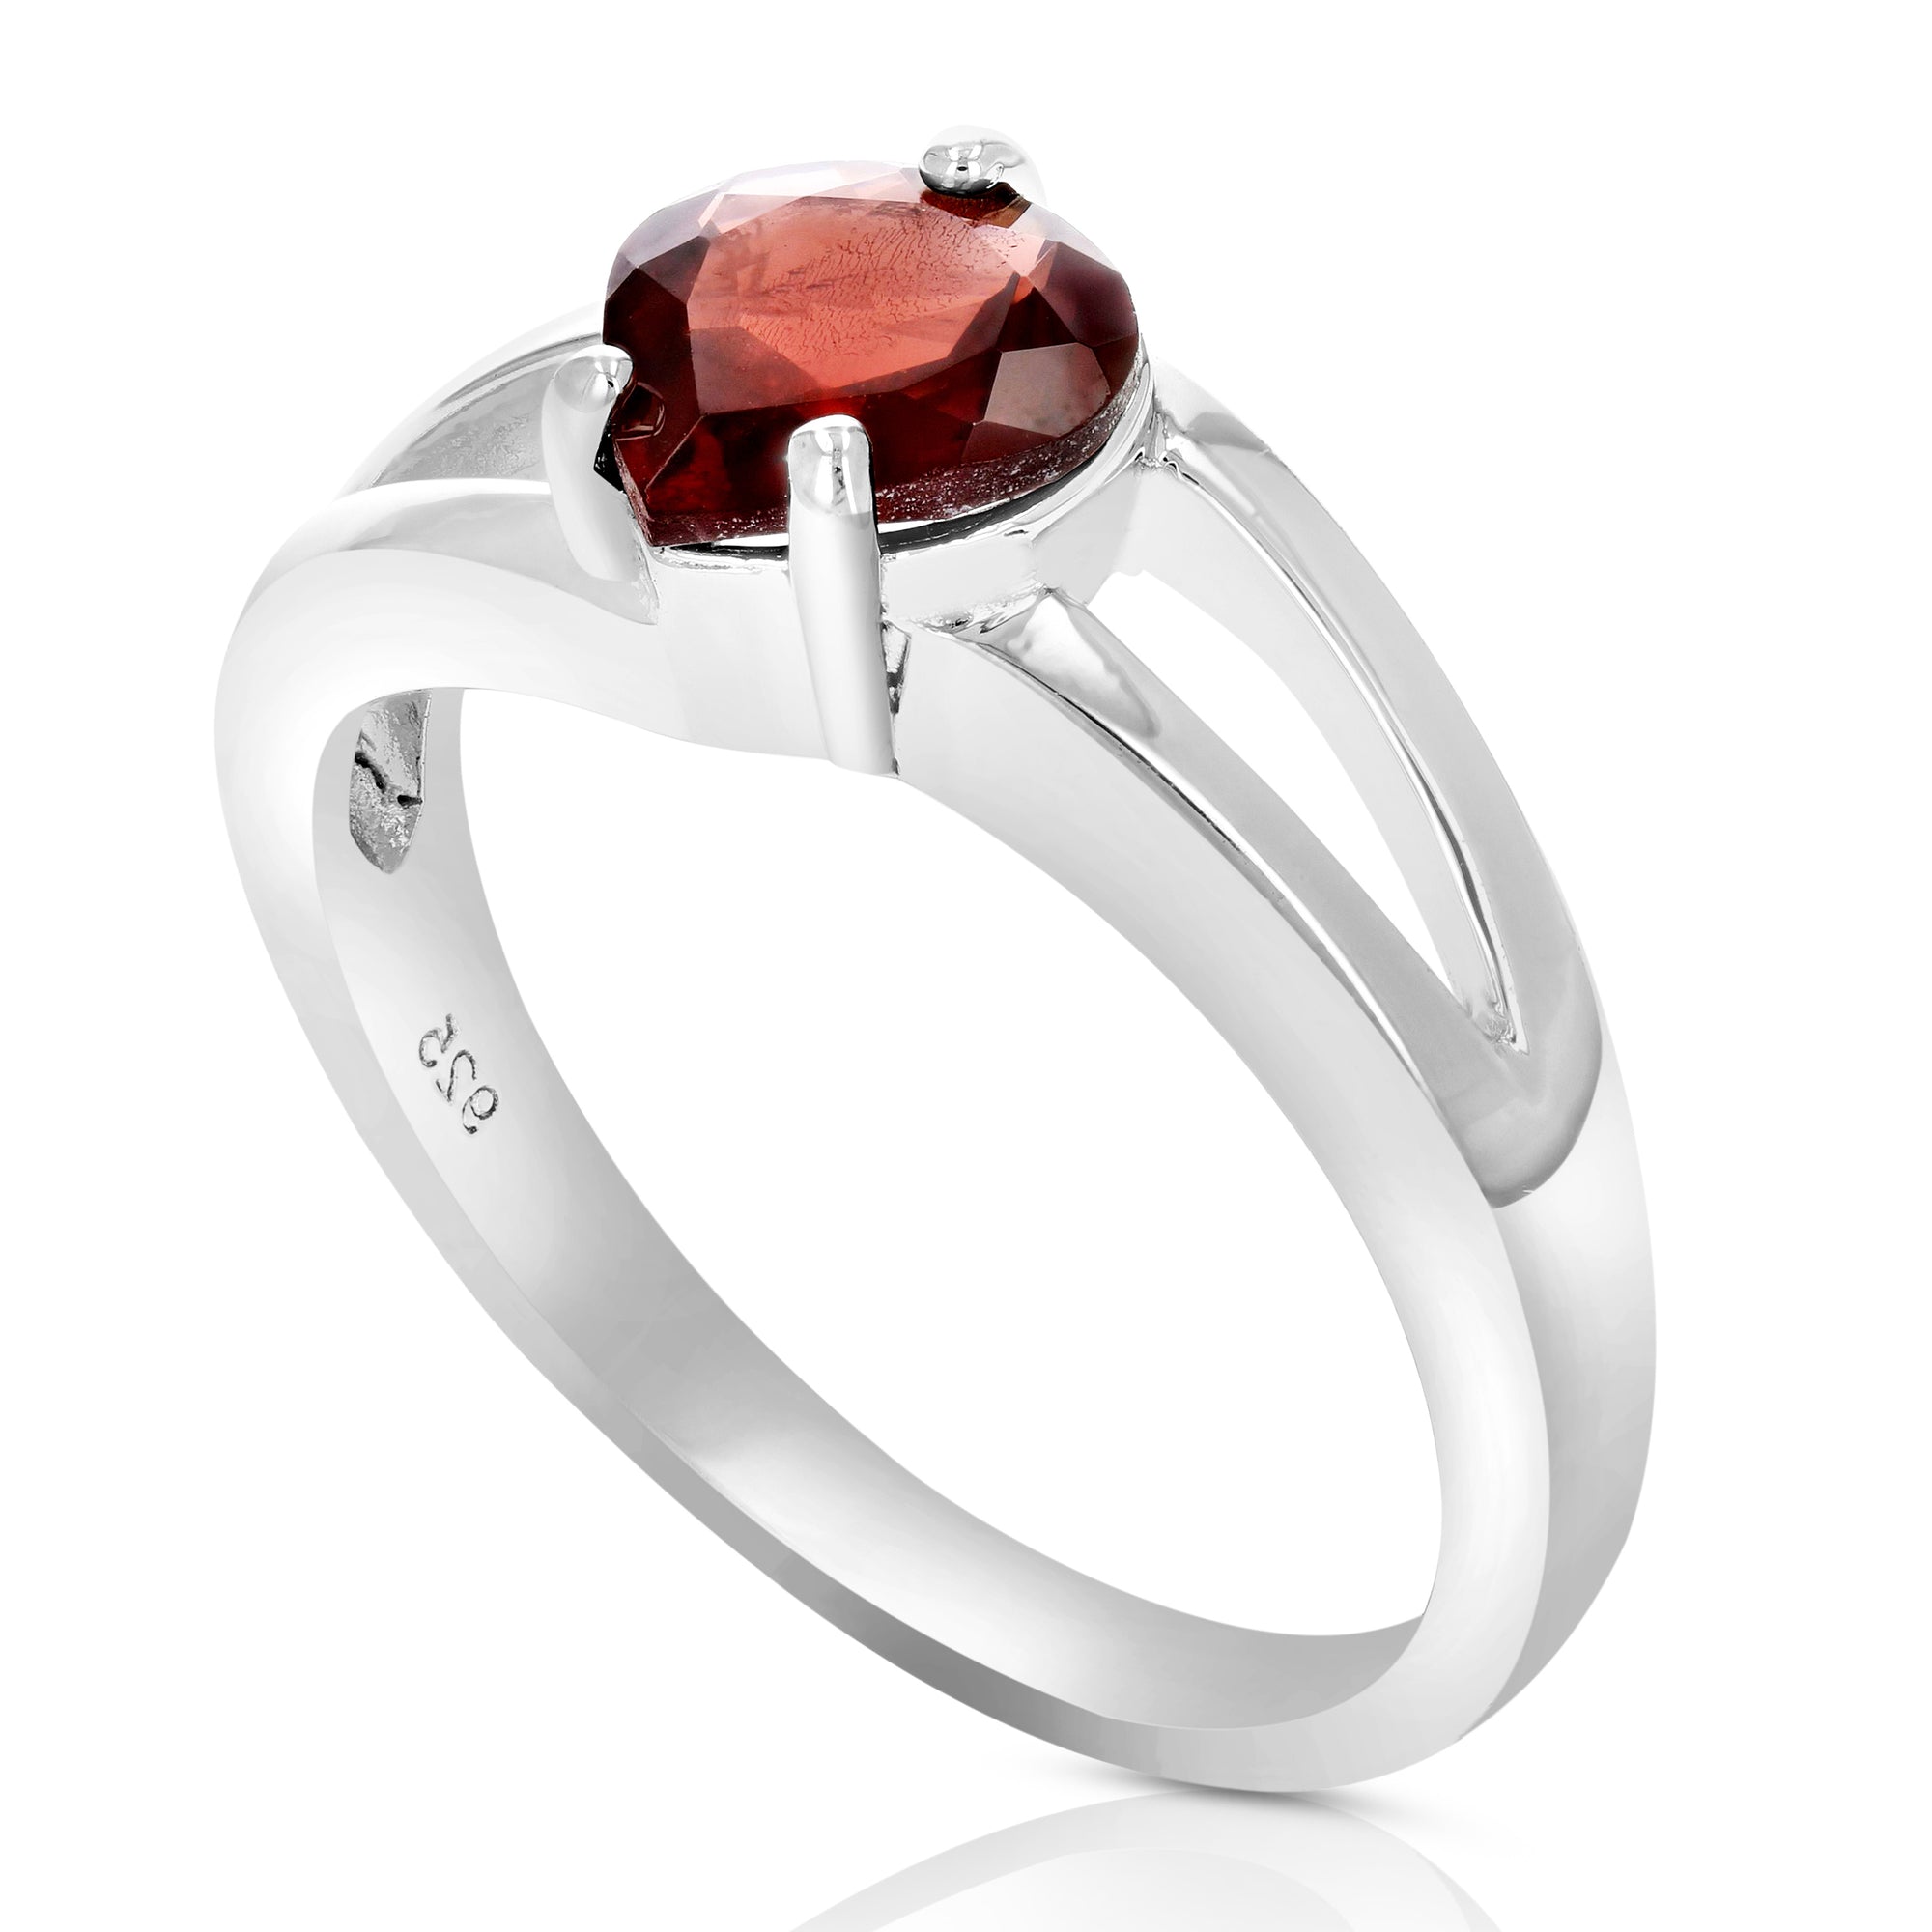 1 cttw Garnet Ring in .925 Sterling Silver with Rhodium Plating Solitaire Heart